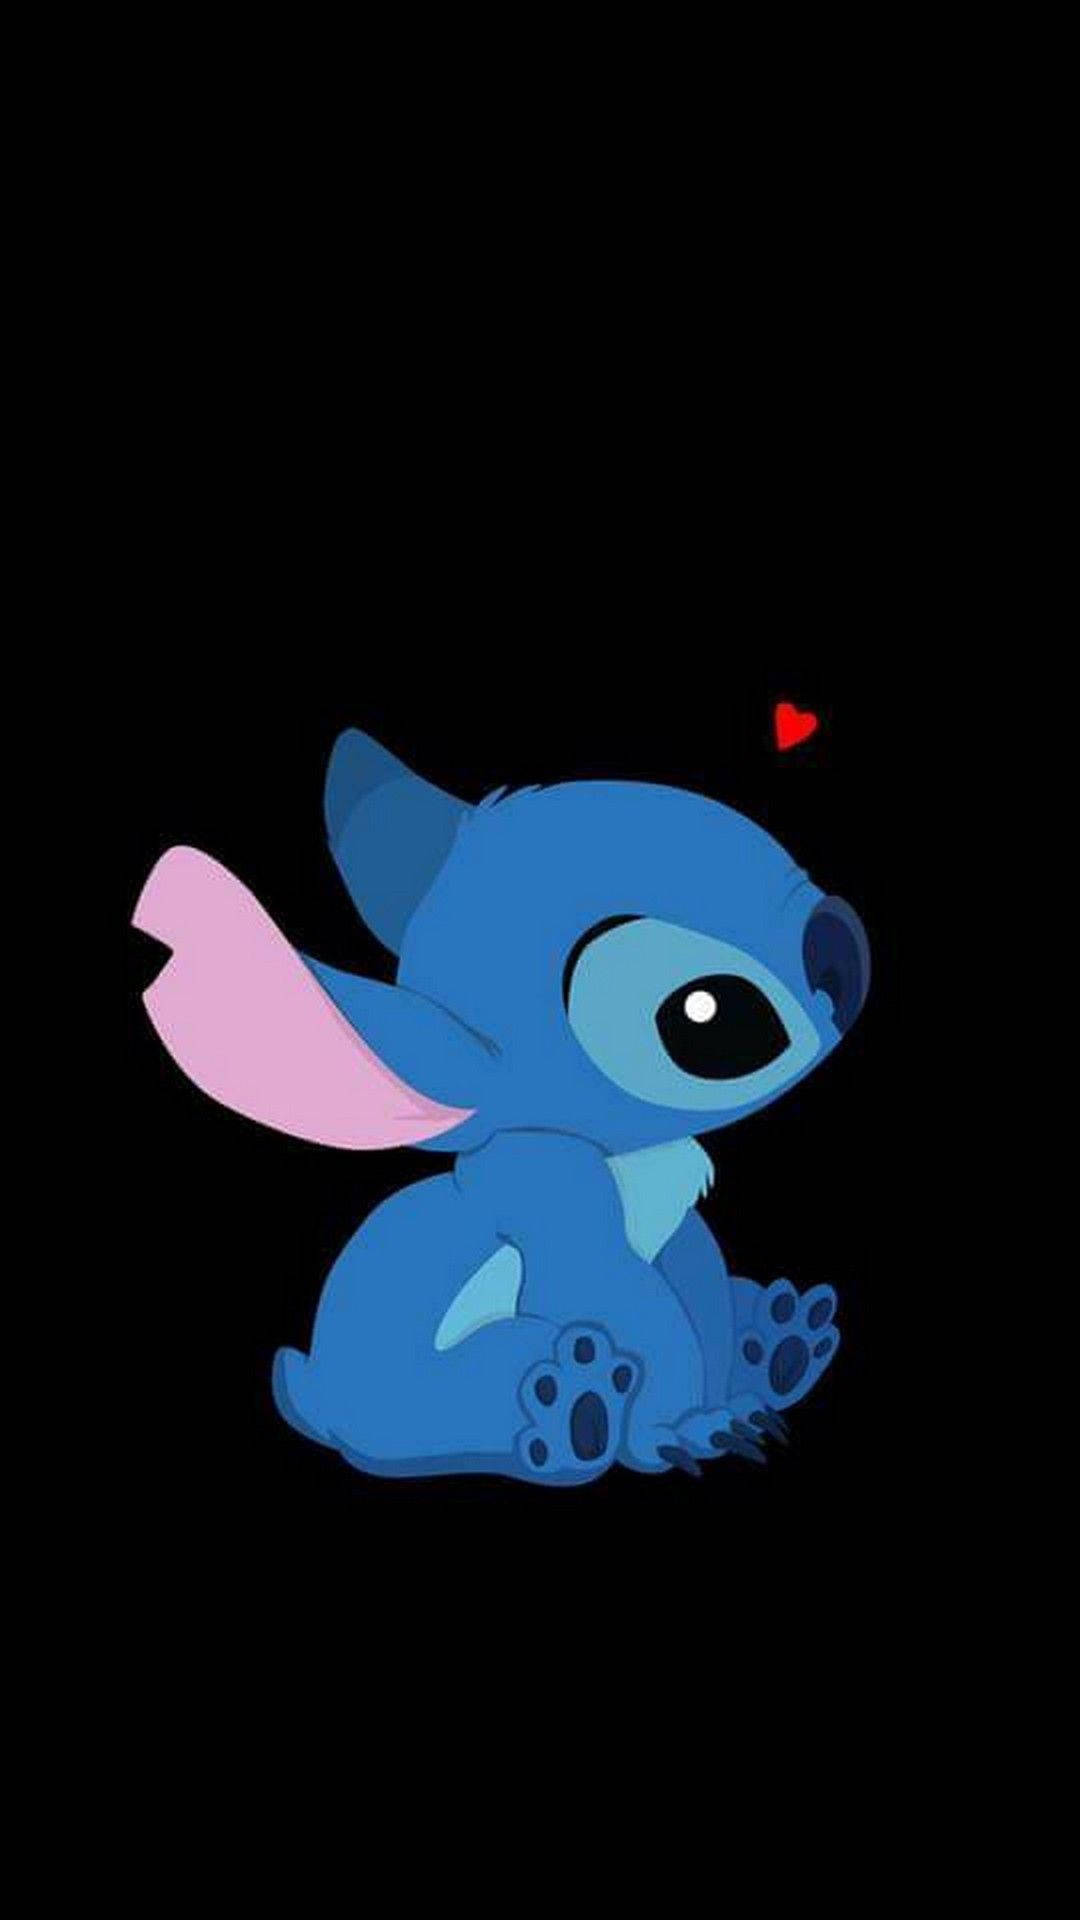 Stitch Enjoys the Little Things in Life Wallpaper